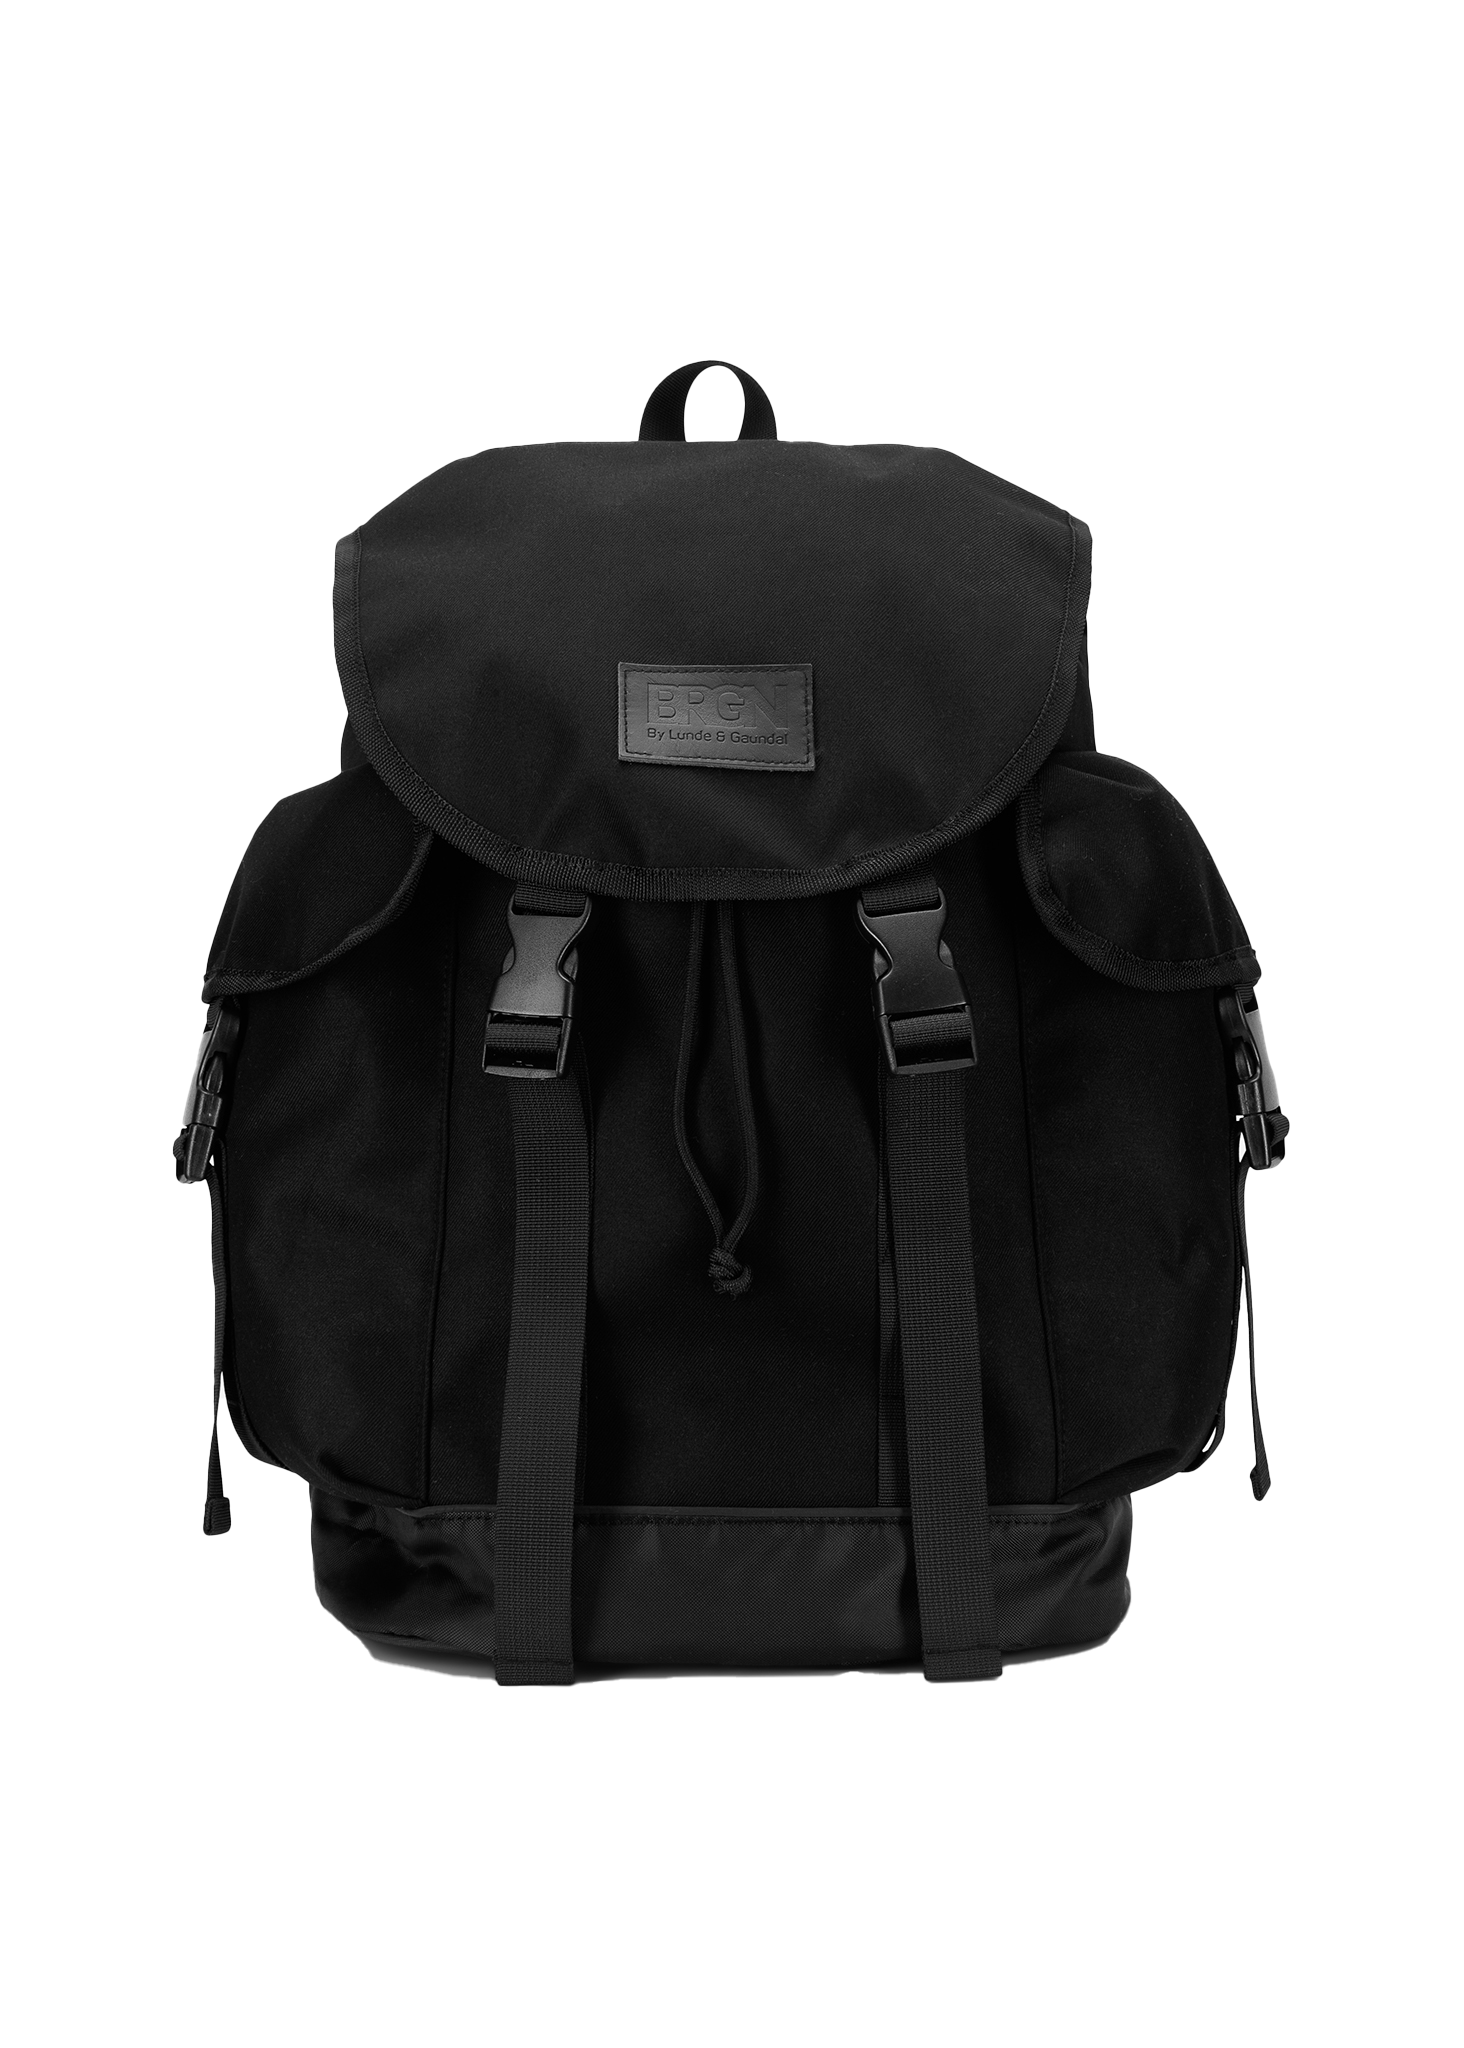 BRGN by Lunde & Gaundal Frost Backpack Accessories 095 New Black